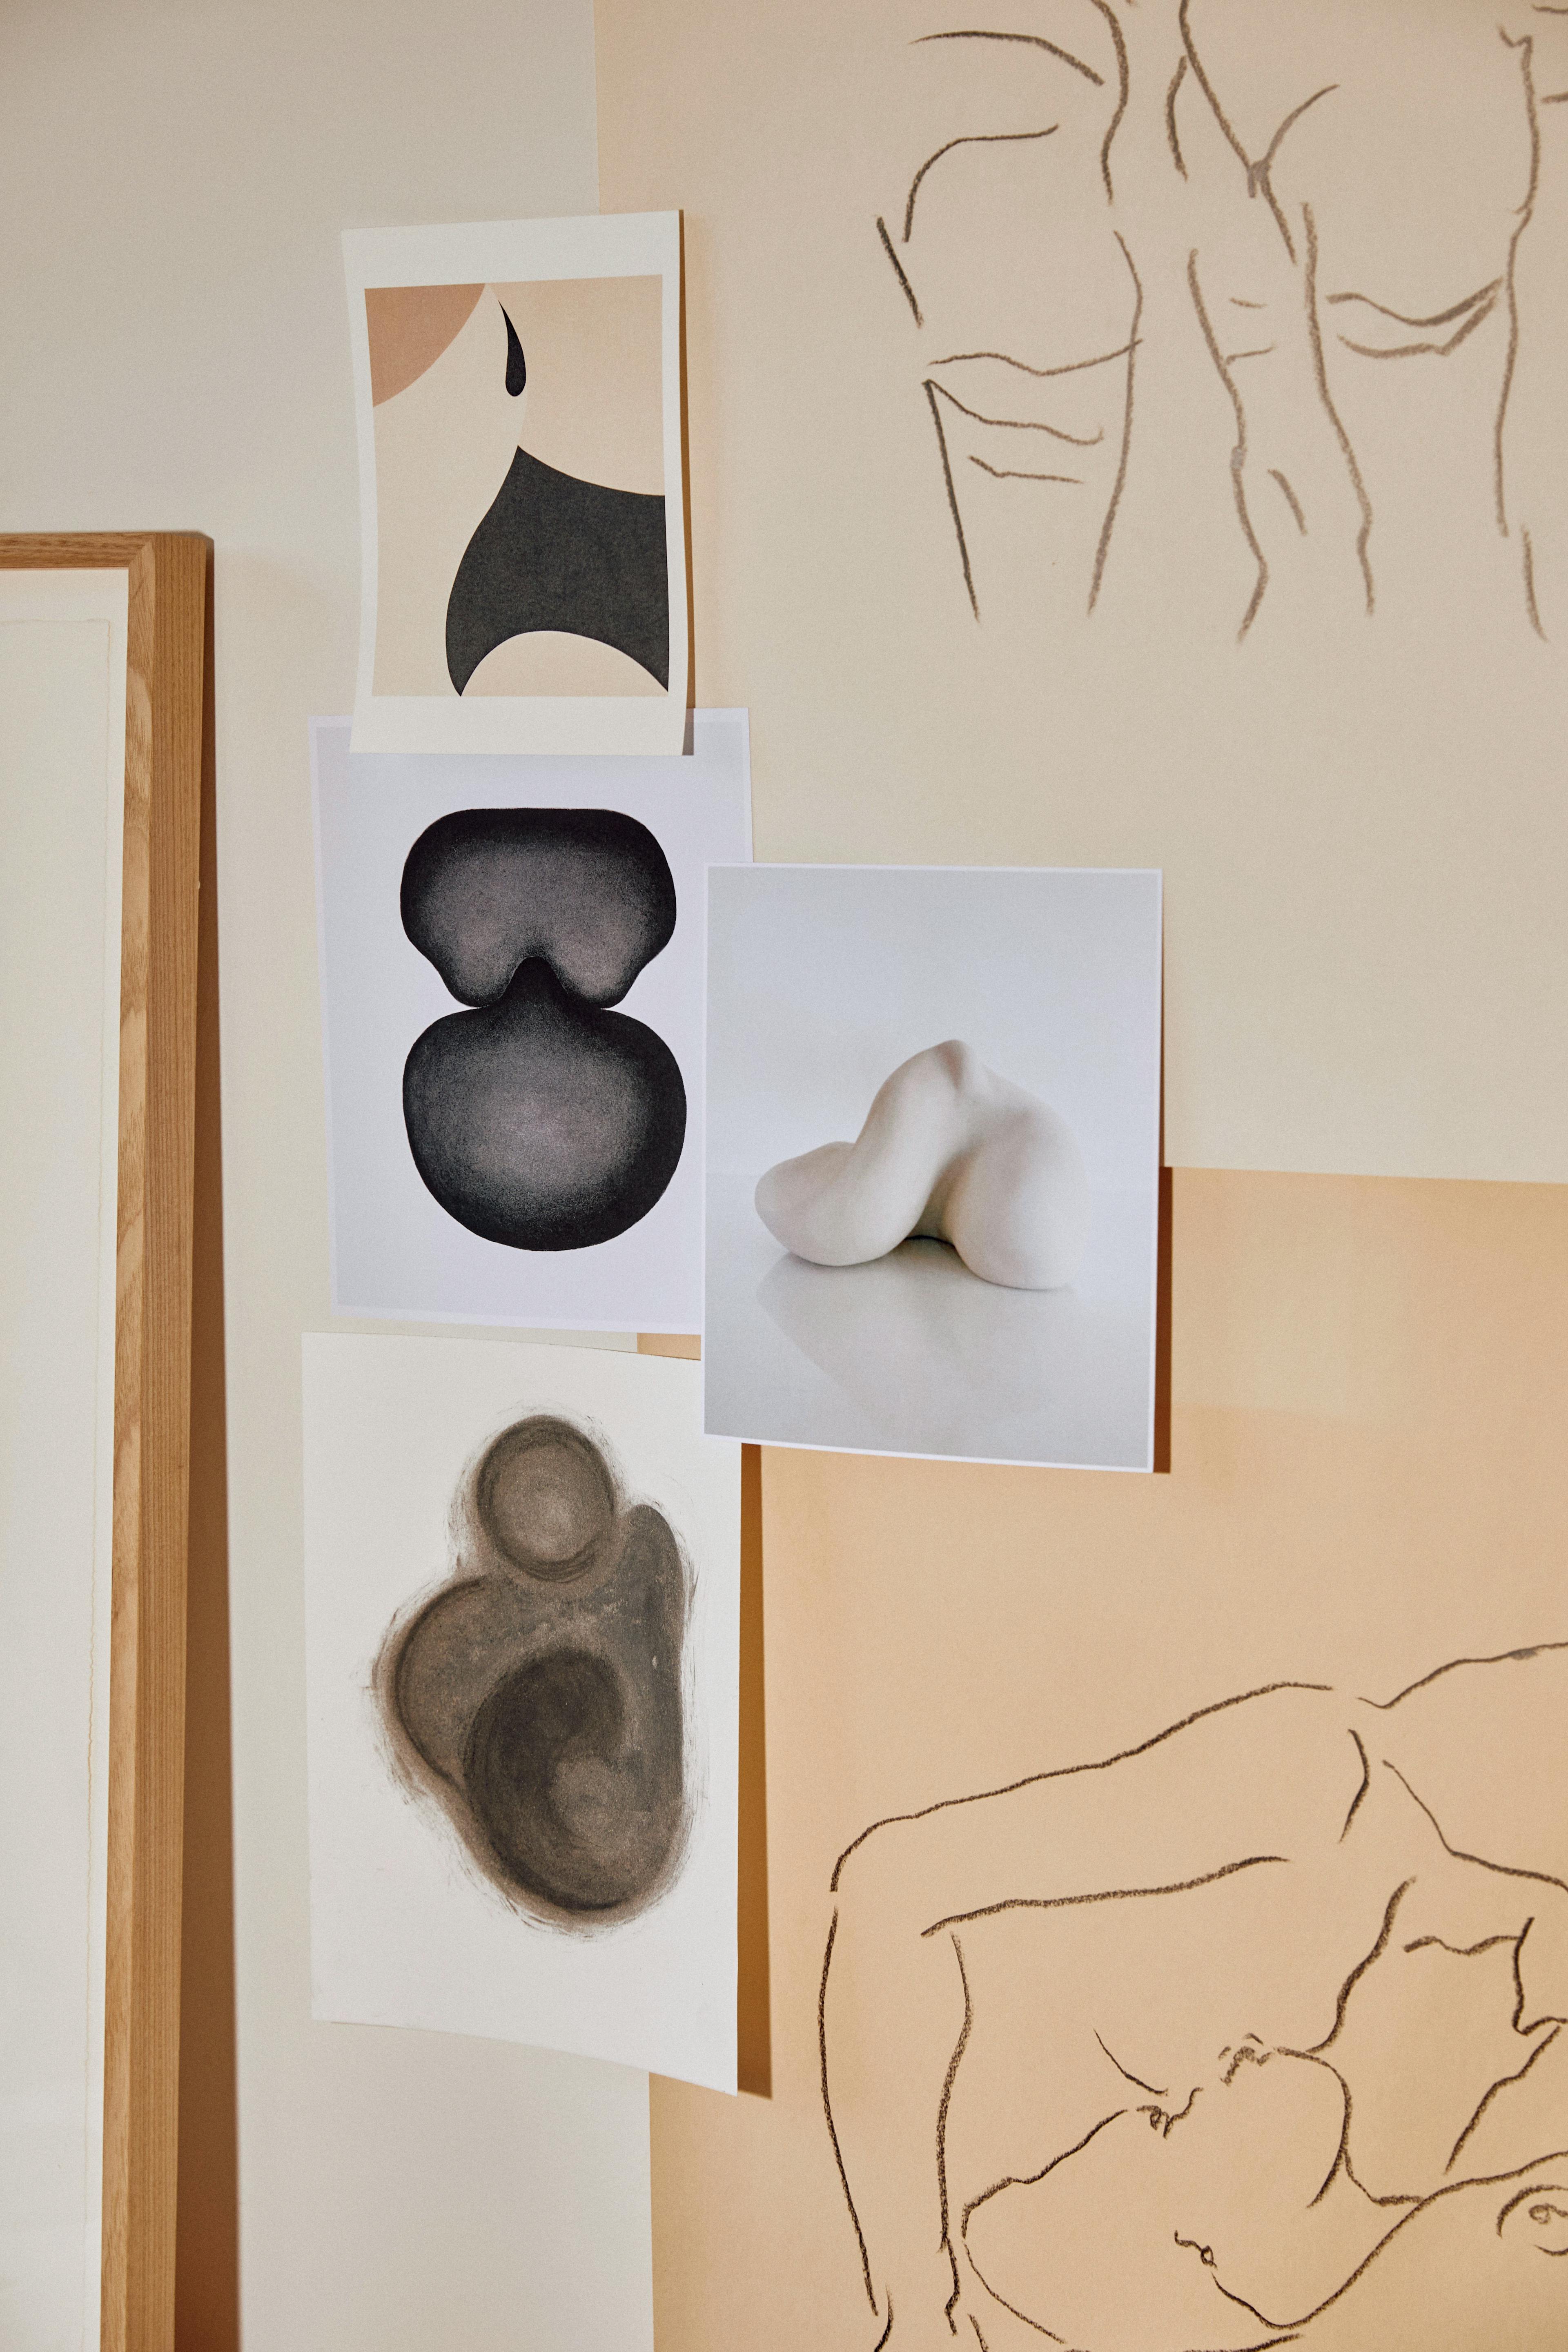 Six images of black, white, and tan figures pinned to a wall in Caroline Walls' studio.